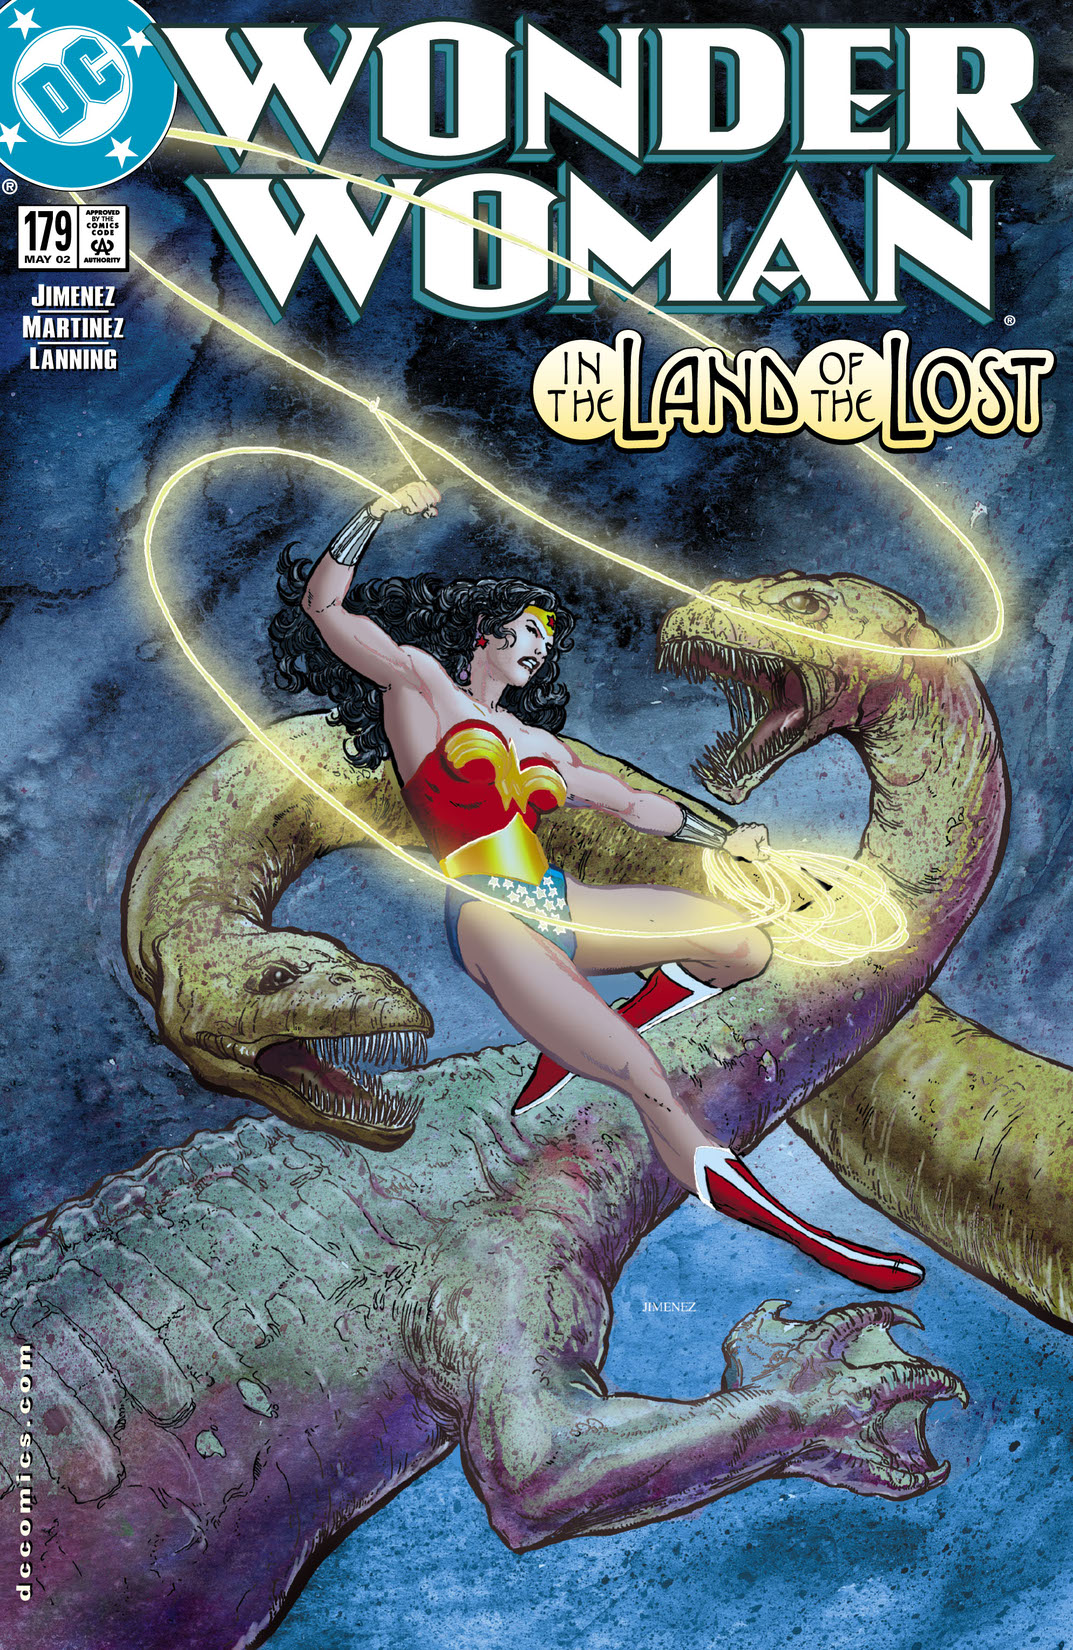 Wonder Woman (1986-) #179 preview images